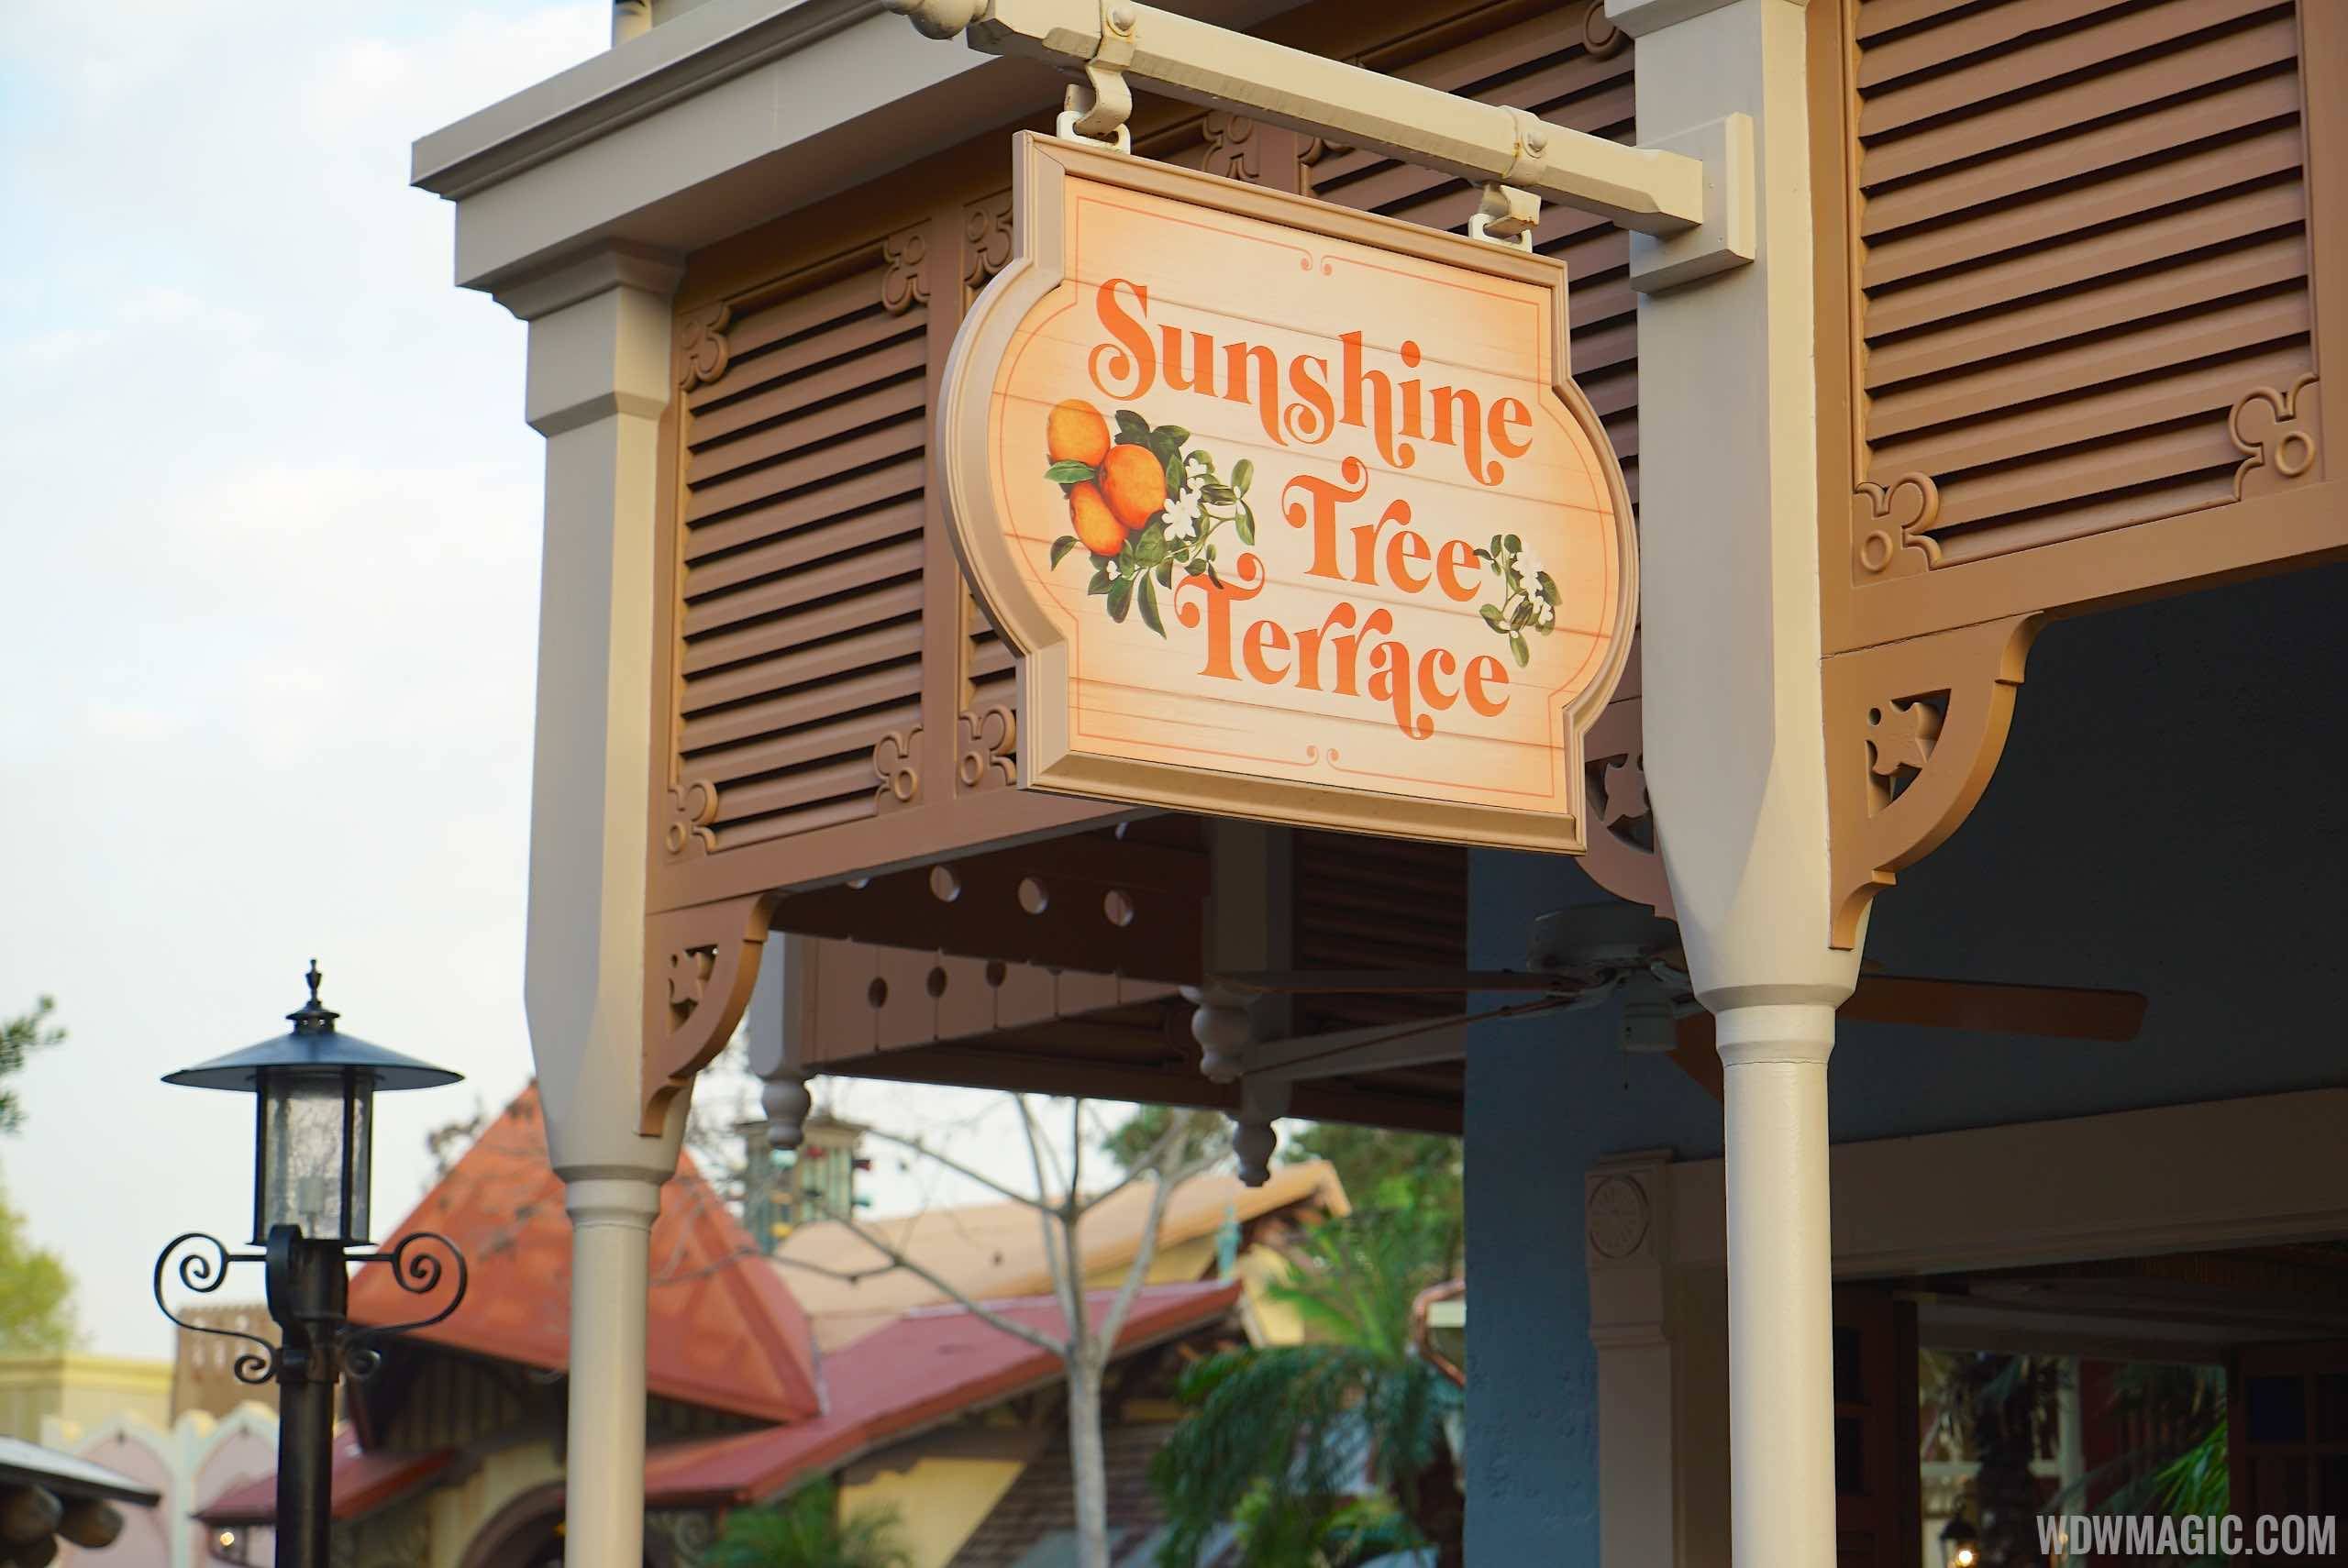 PHOTOS - Sunshine Tree Terrace opens in new location